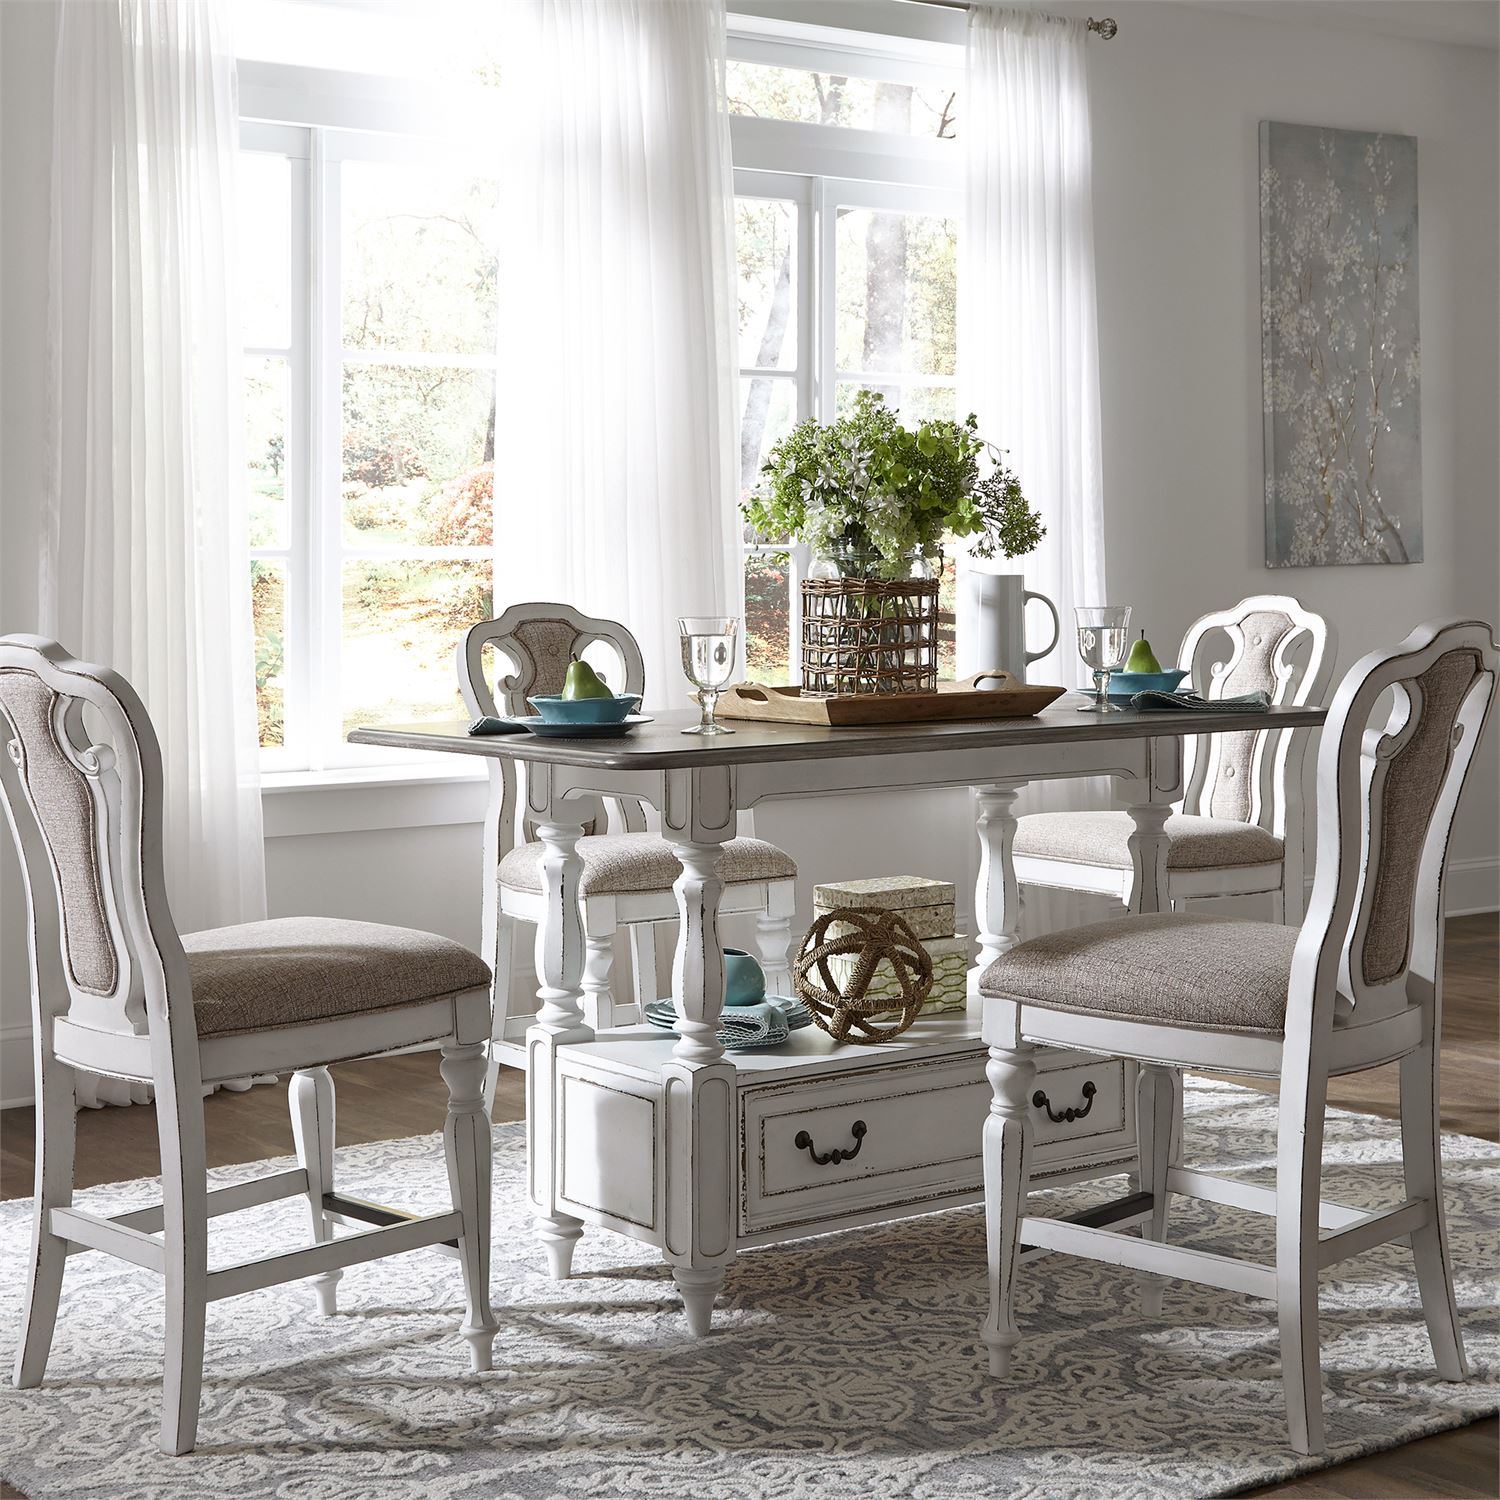 5 piece dining room set in Antique White Finish